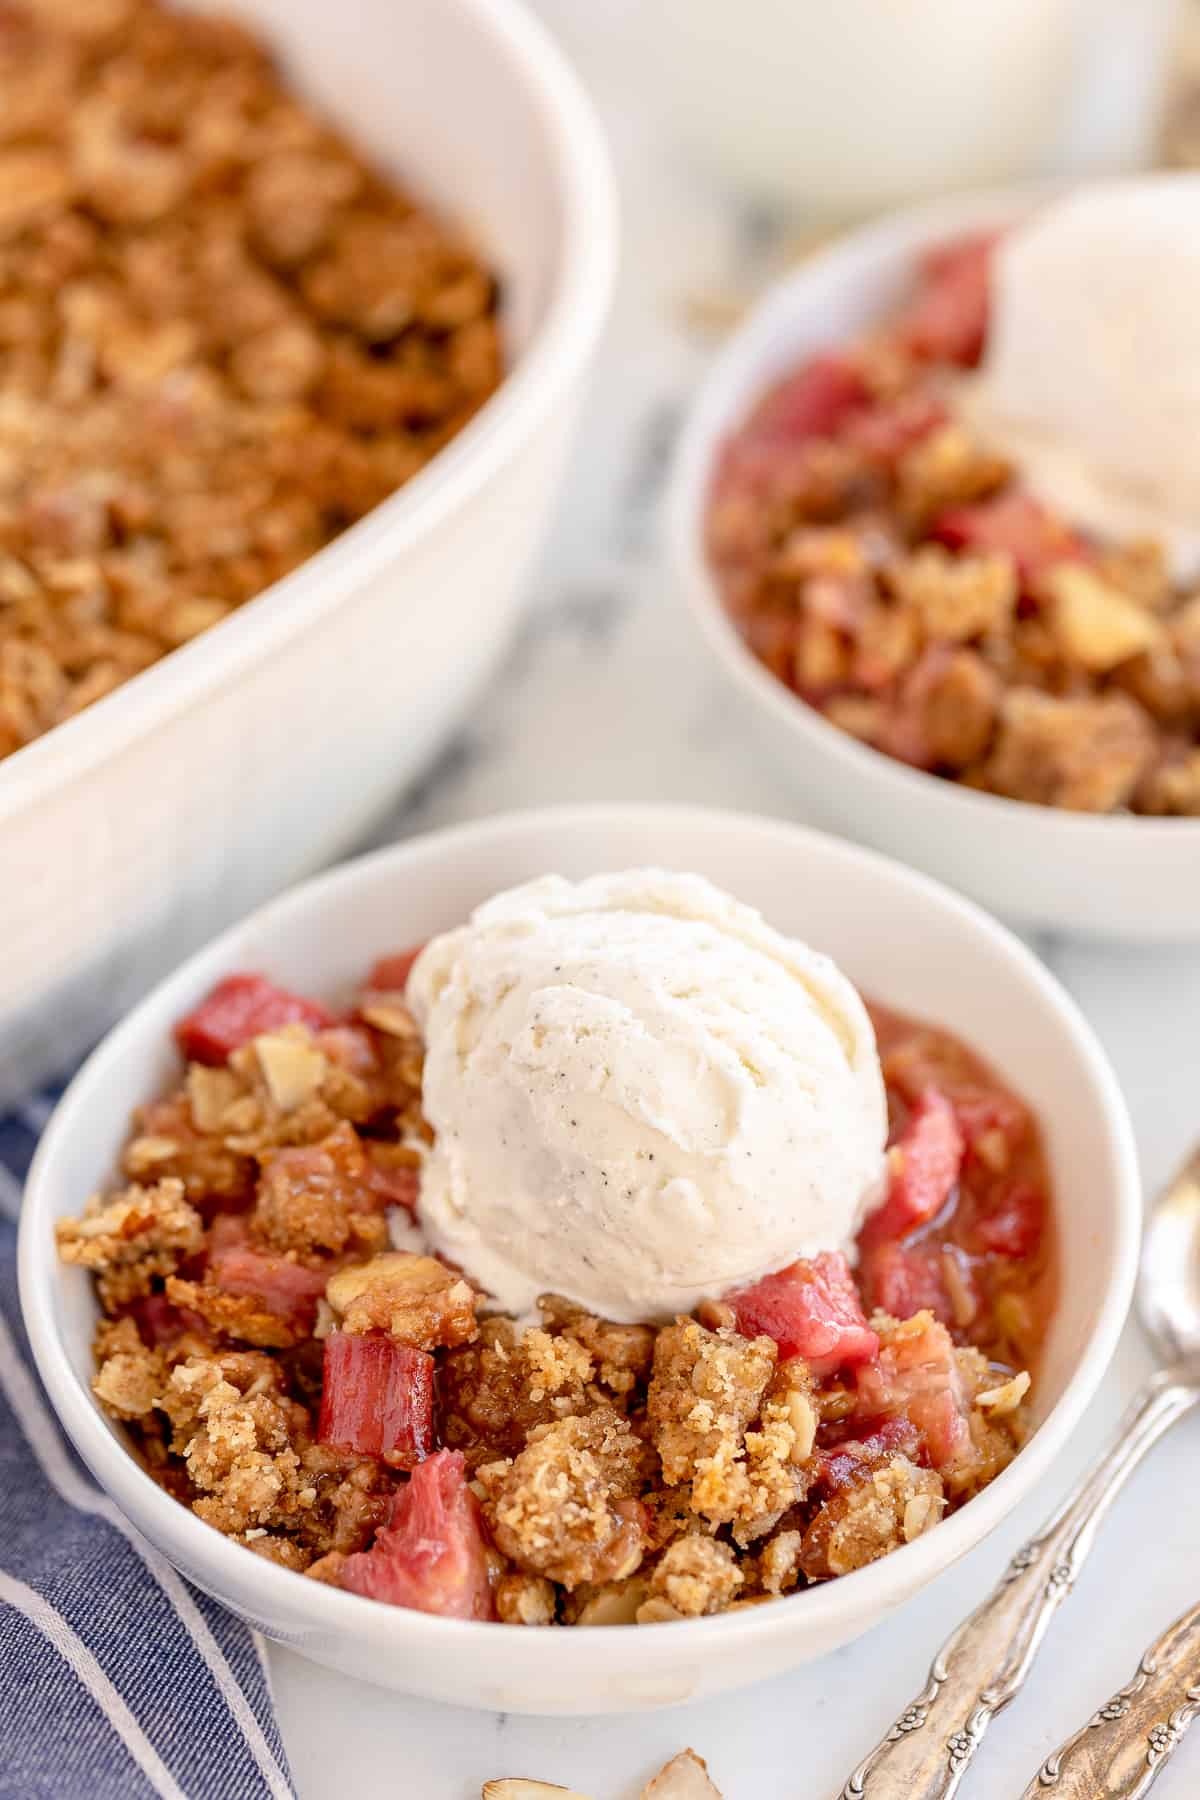 Rhubarb crisp in white bowls topped with vanilla ice cream.